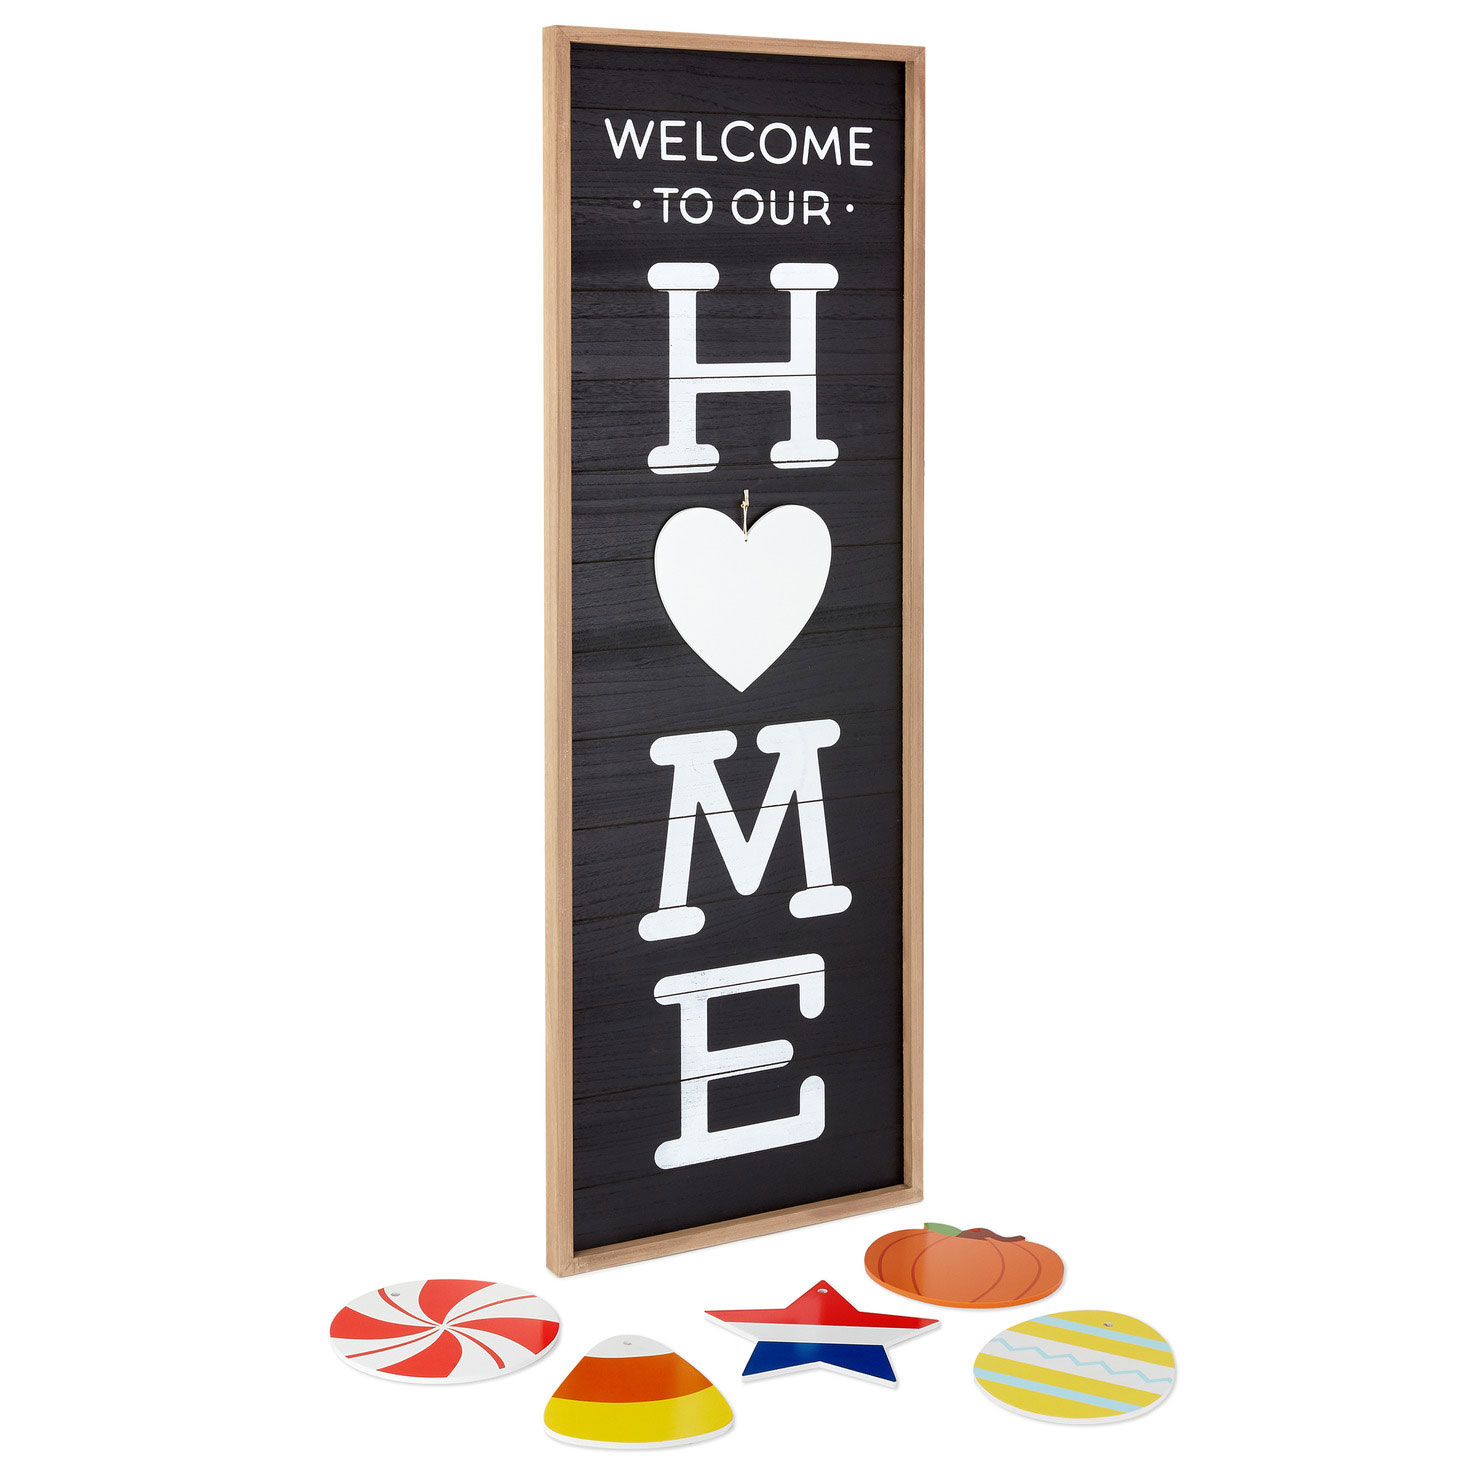 welcome to our home sign